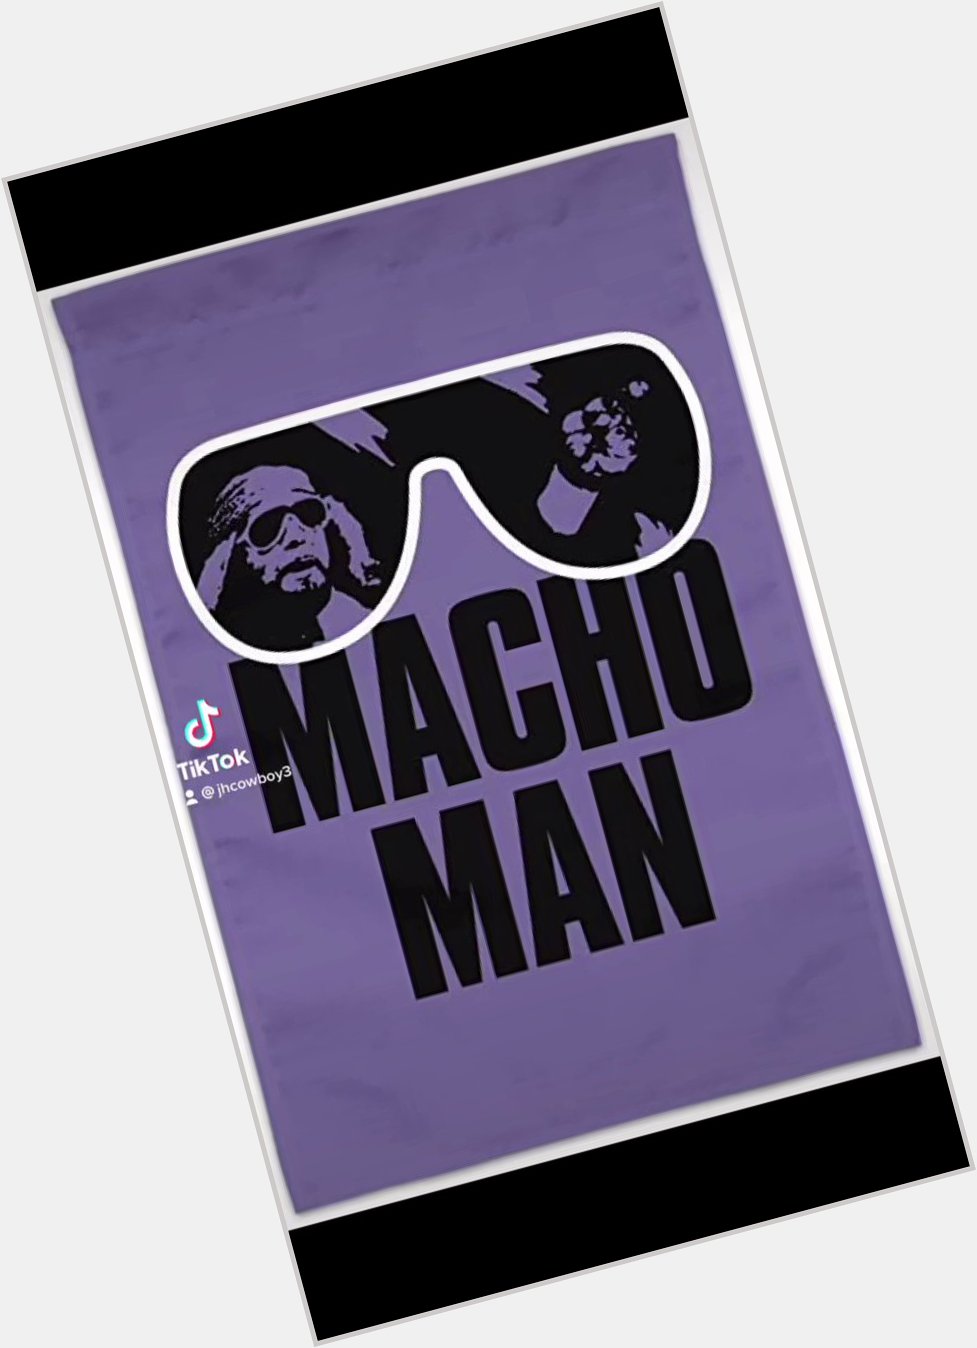 Happy Birthday to the late Macho Man Randy Savage from a huge wrestling nerd.  